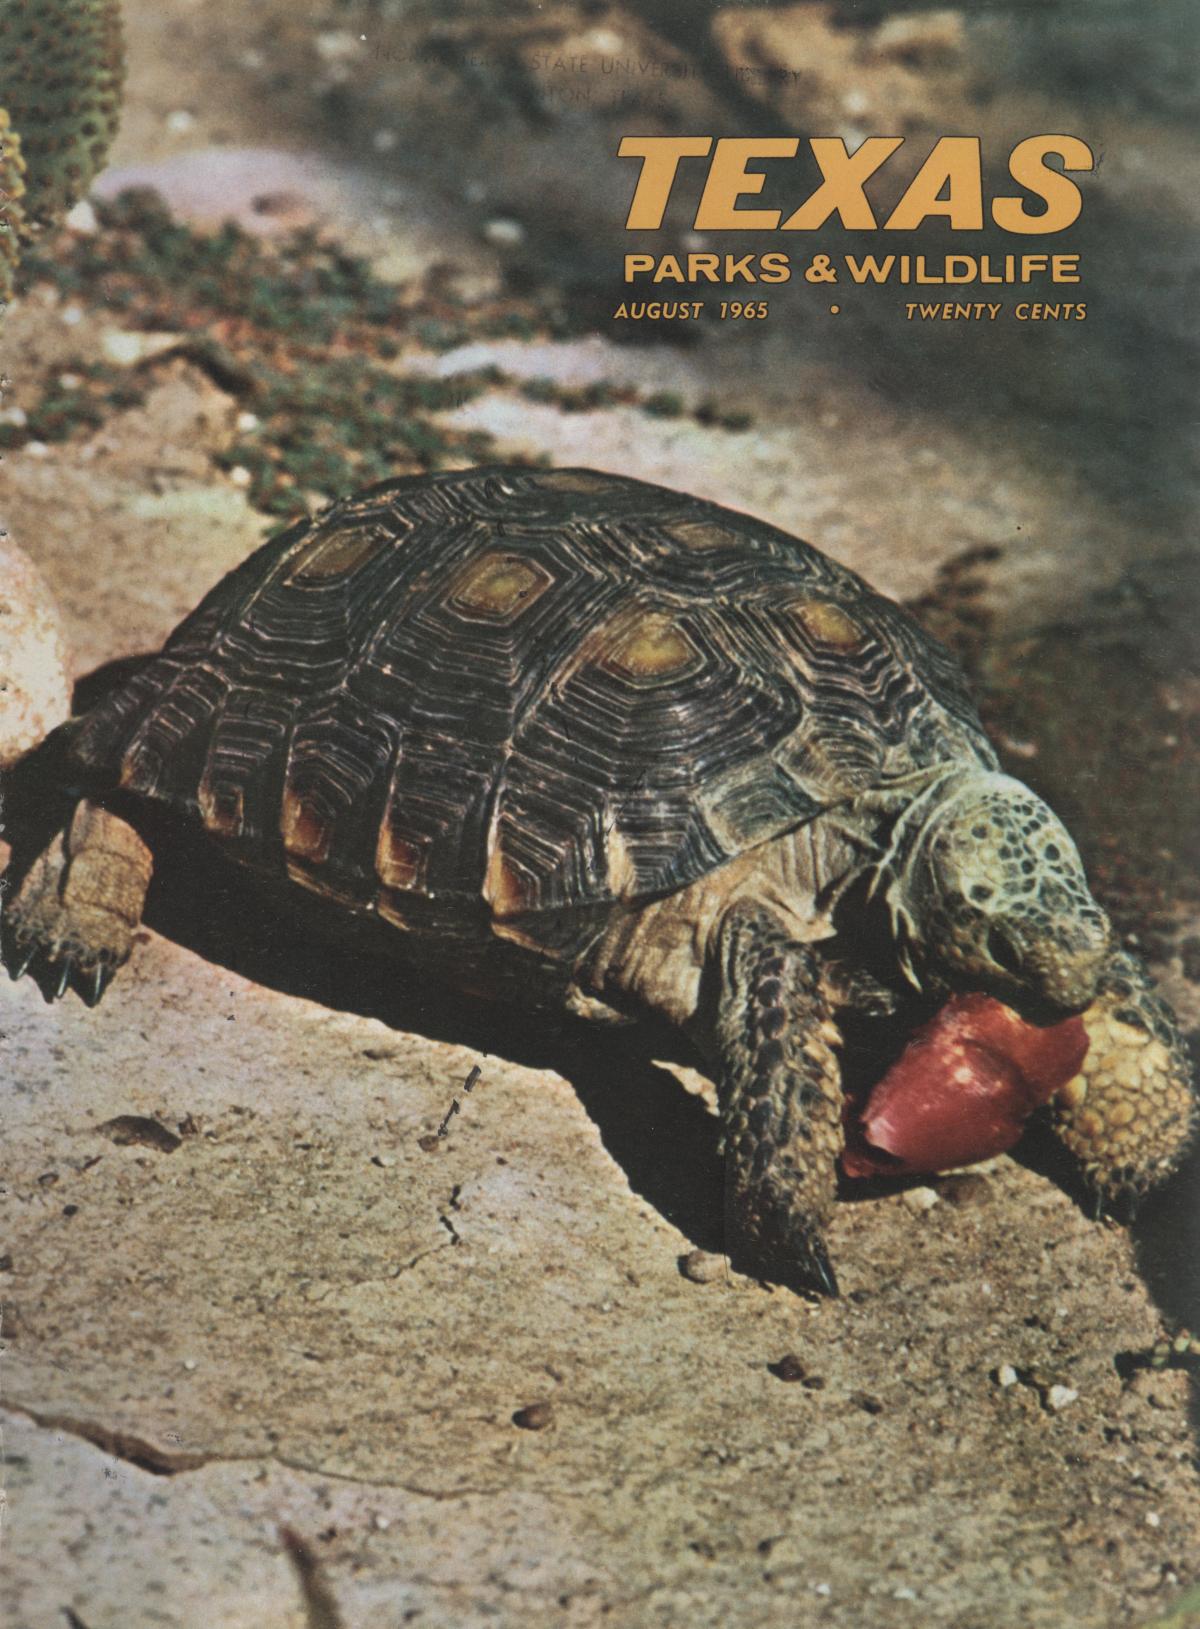 Texas Parks & Wildlife, Volume 23, Number 8, August 1965
                                                
                                                    Front Cover
                                                